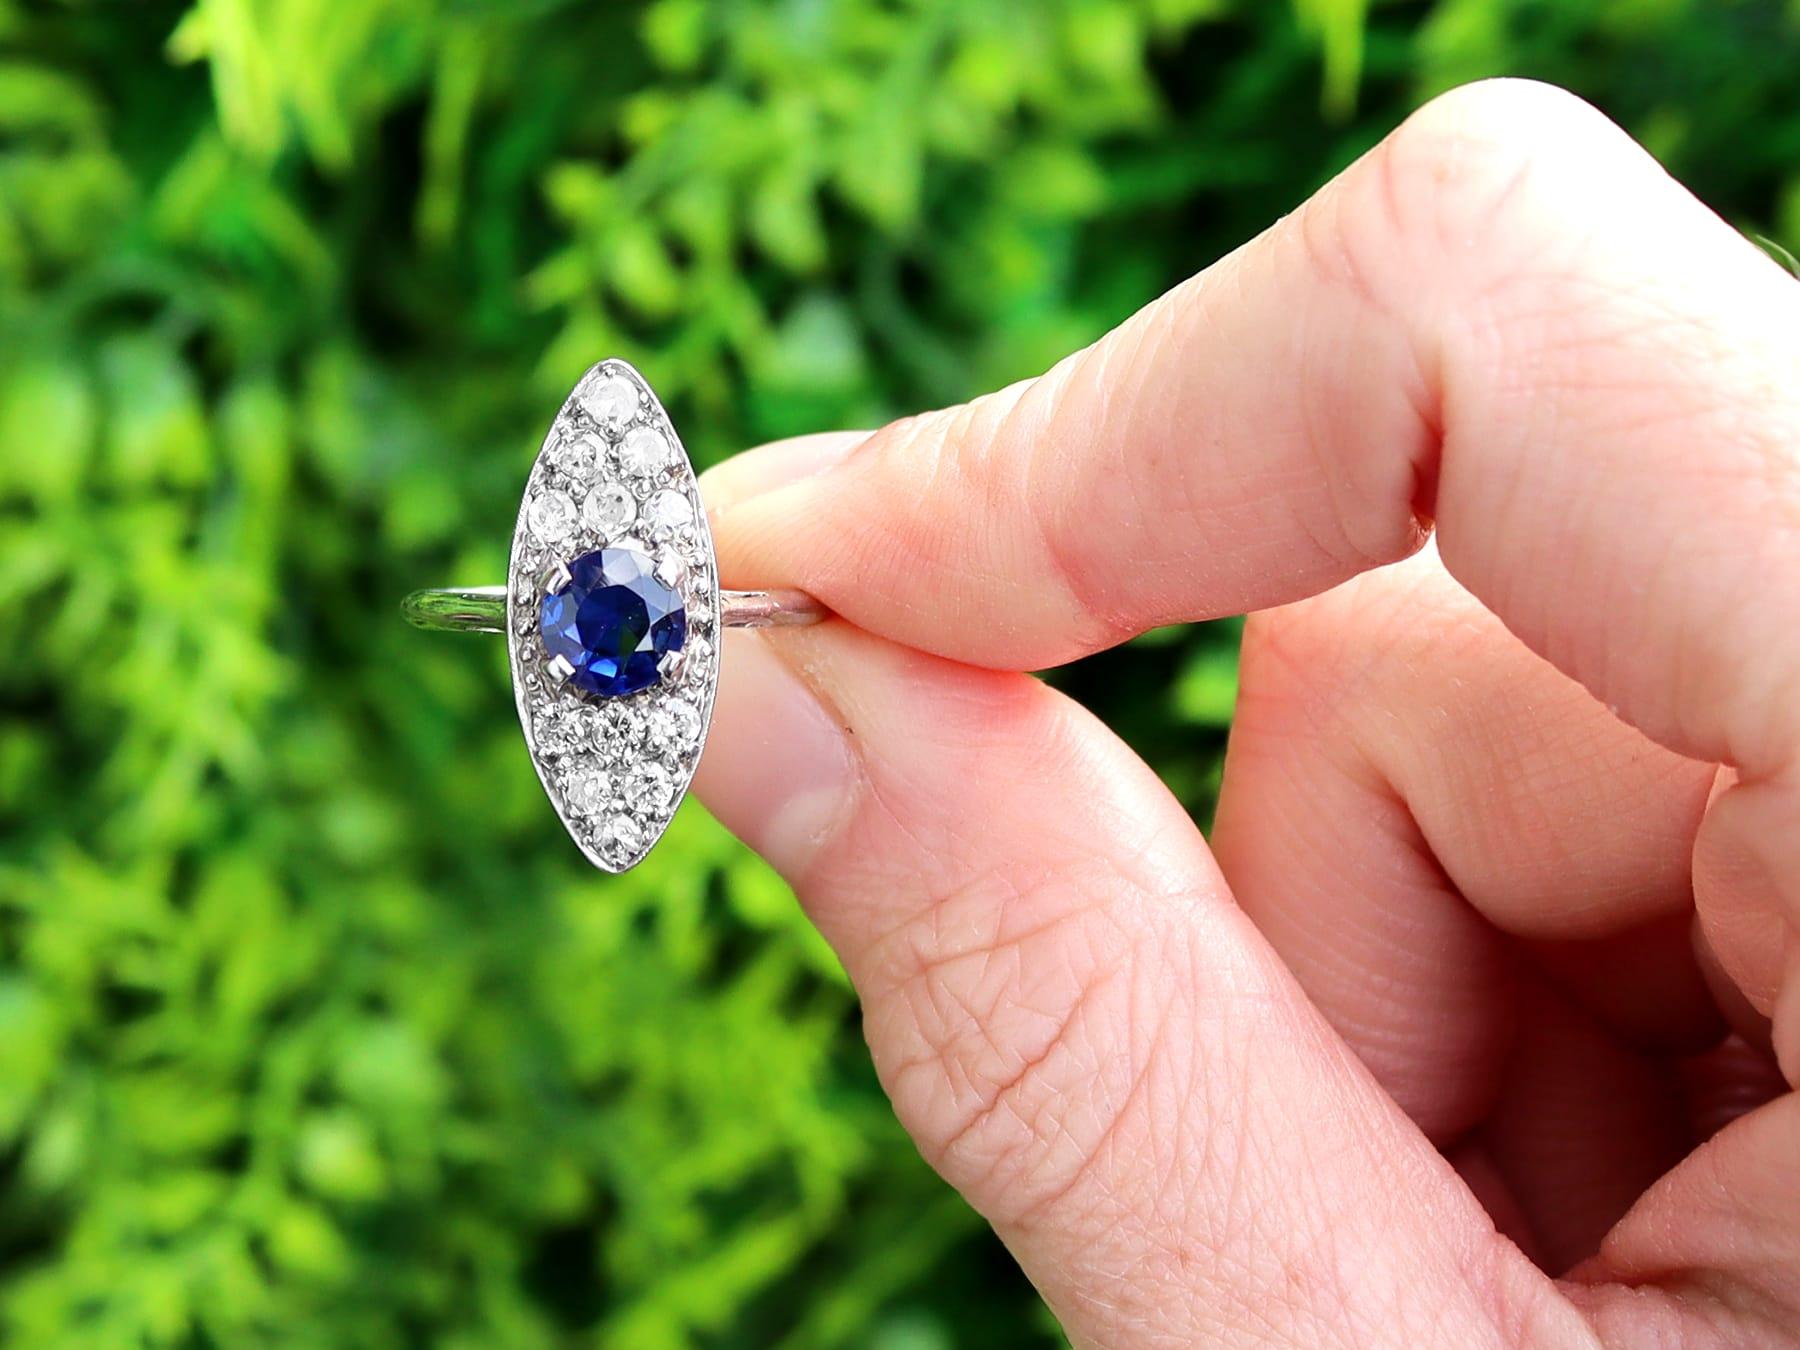 A fine and impressive antique 1.02 natural blue sapphire and 0.84 carat diamond dress ring in 18 karat white gold; part of our diverse range of gemstone jewelry.

This impressive antique sapphire dress ring has been crafted in 18k white gold.

The